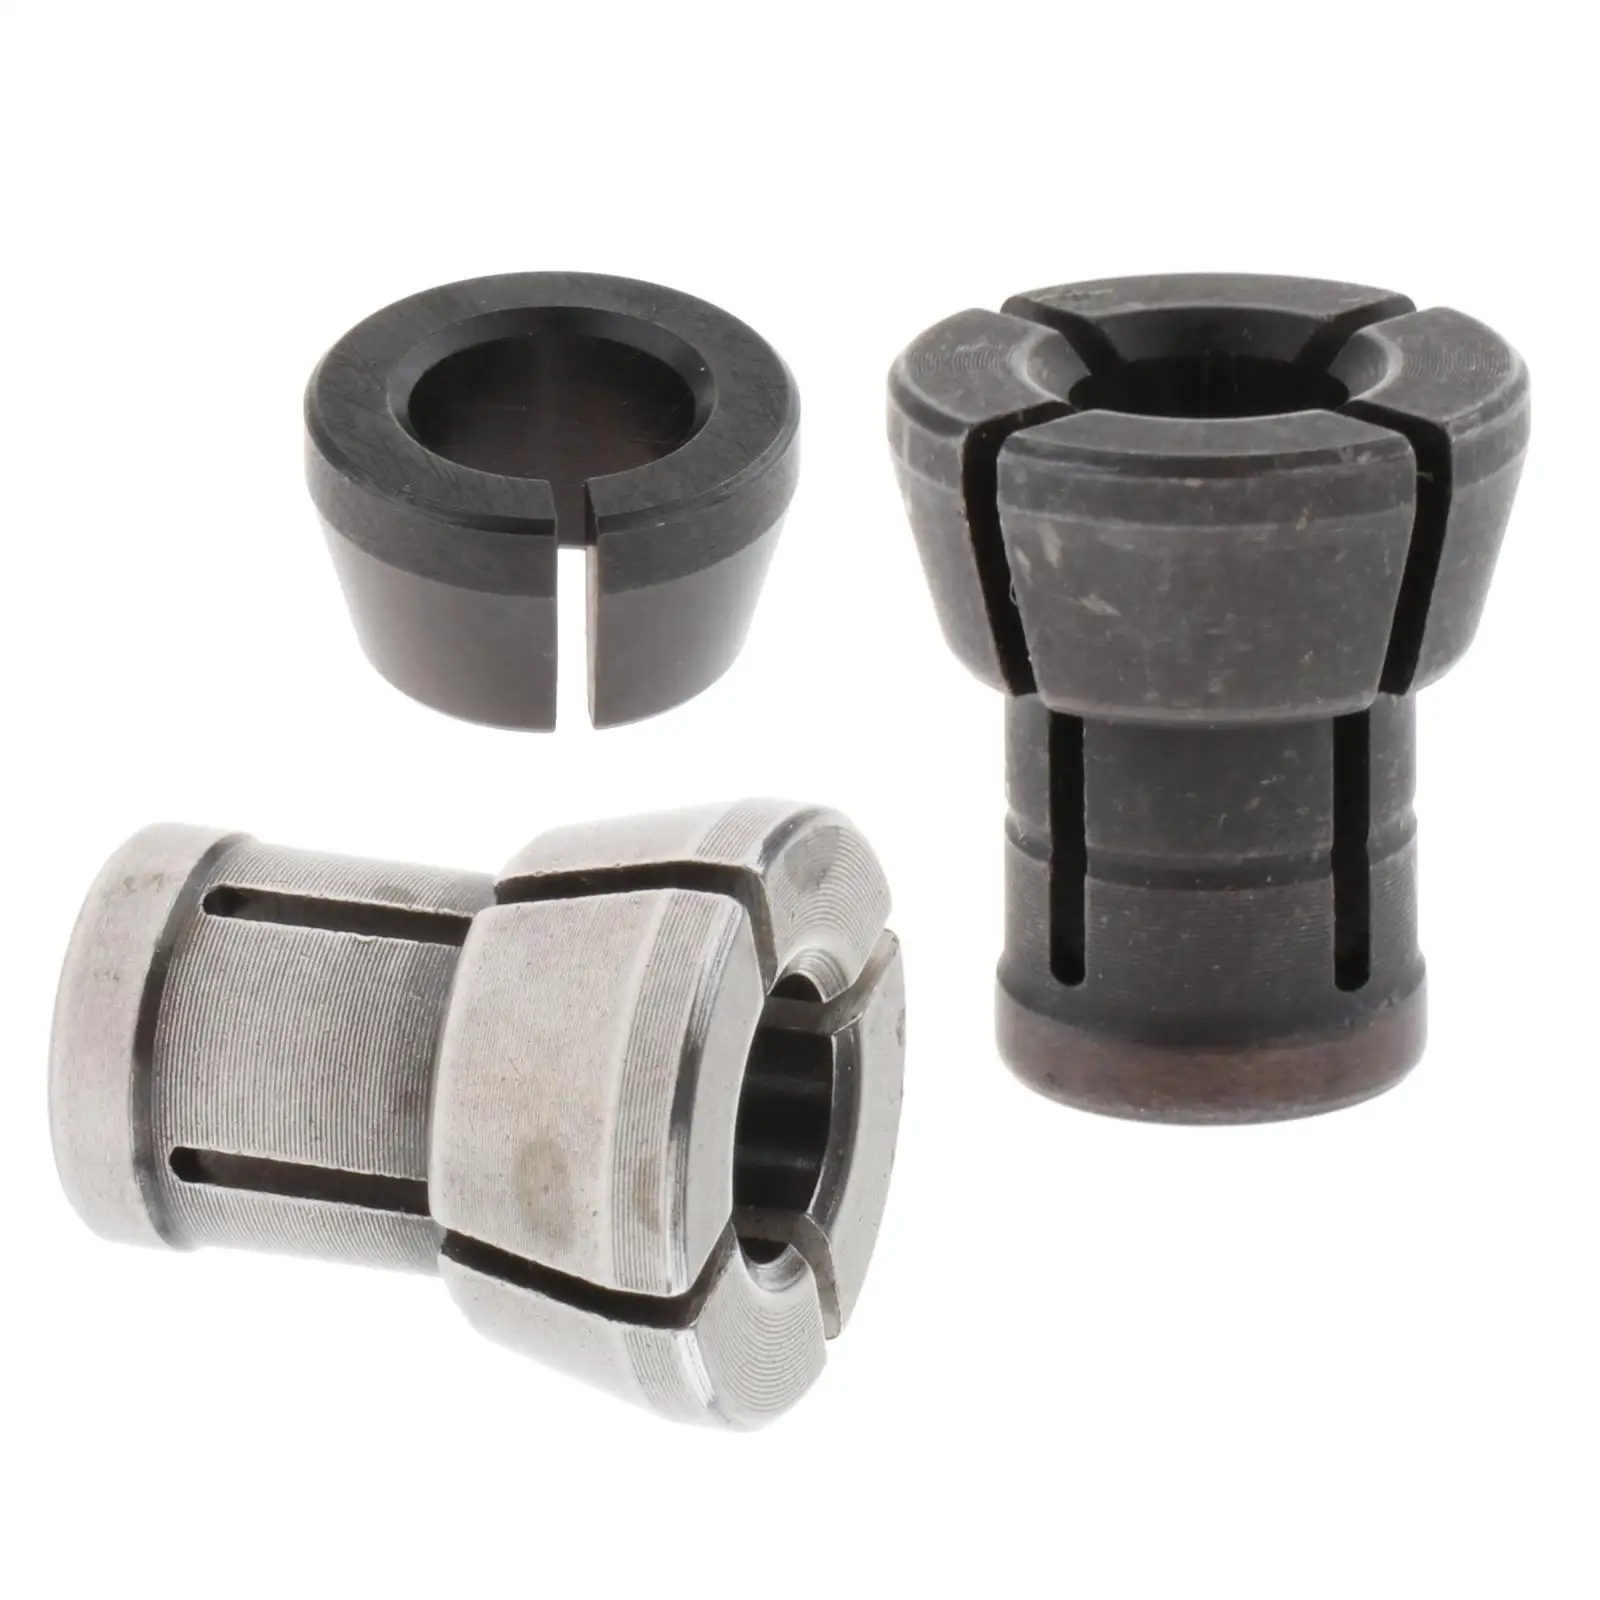 Carbon Steel Collet Chuck Replacement for Engraving Trimming Machine Parts